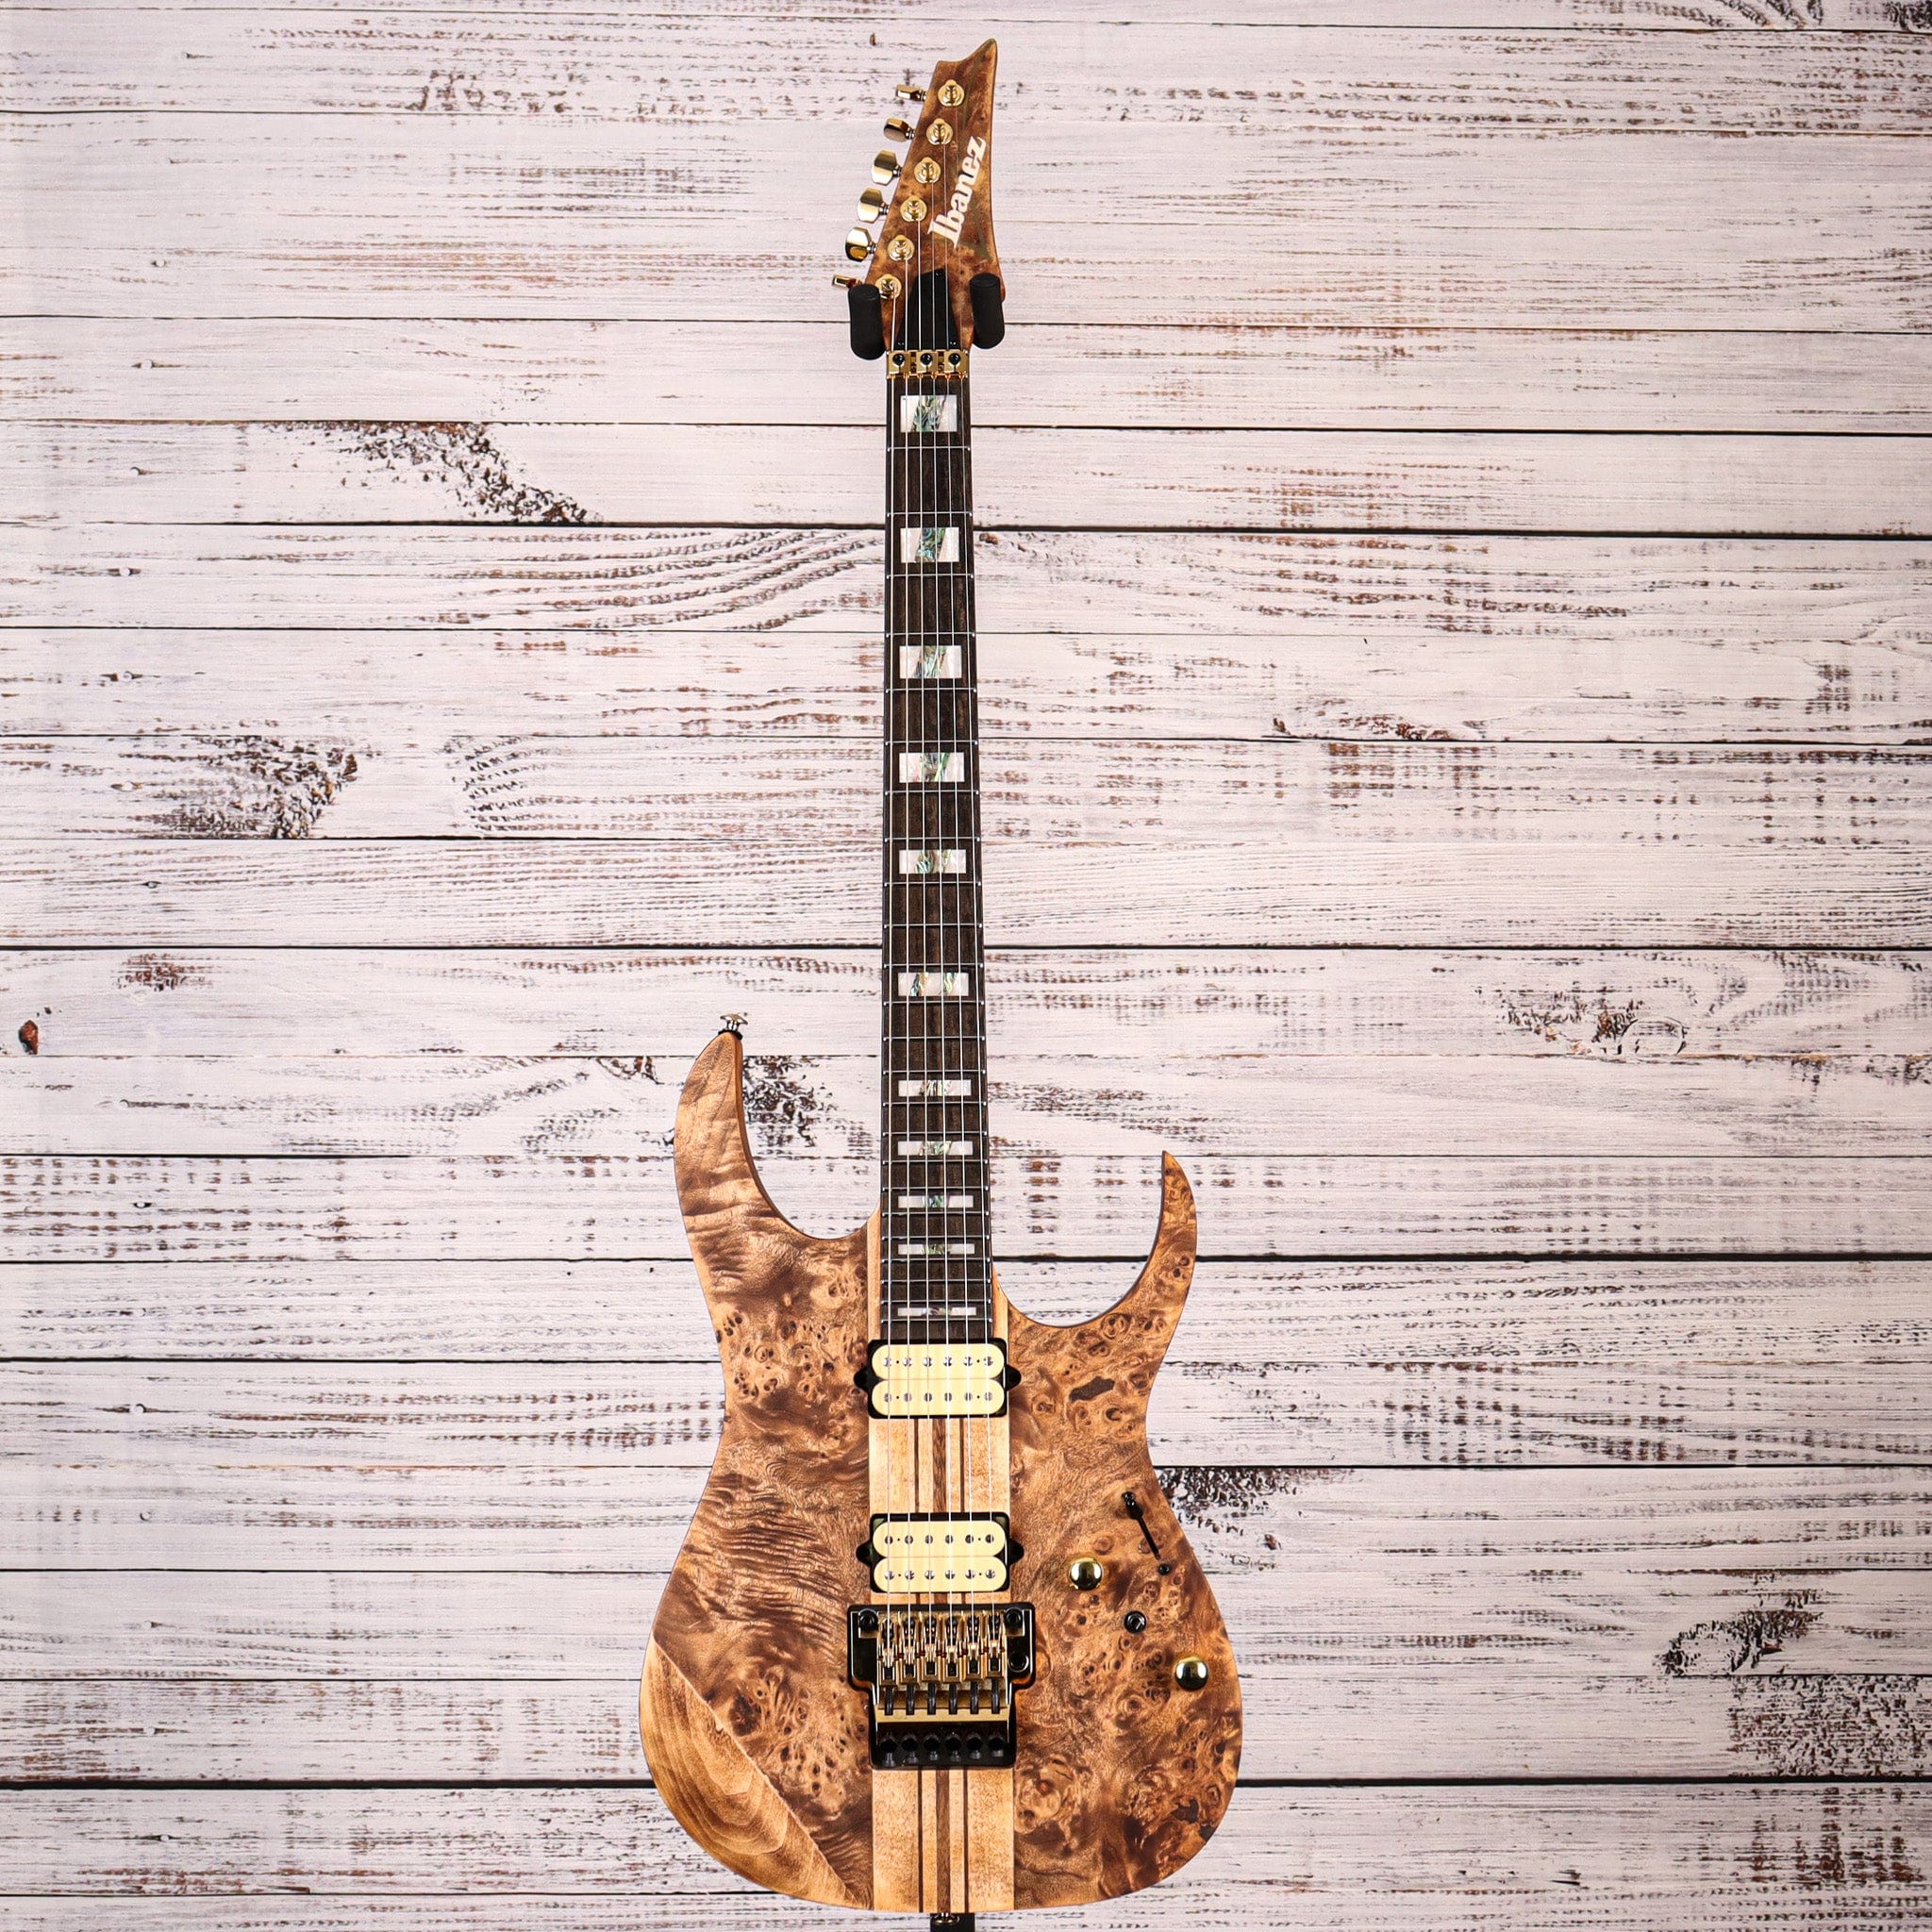 Ibanez Premium RGT1220PB Electric Guitar - Antique Brown Stained